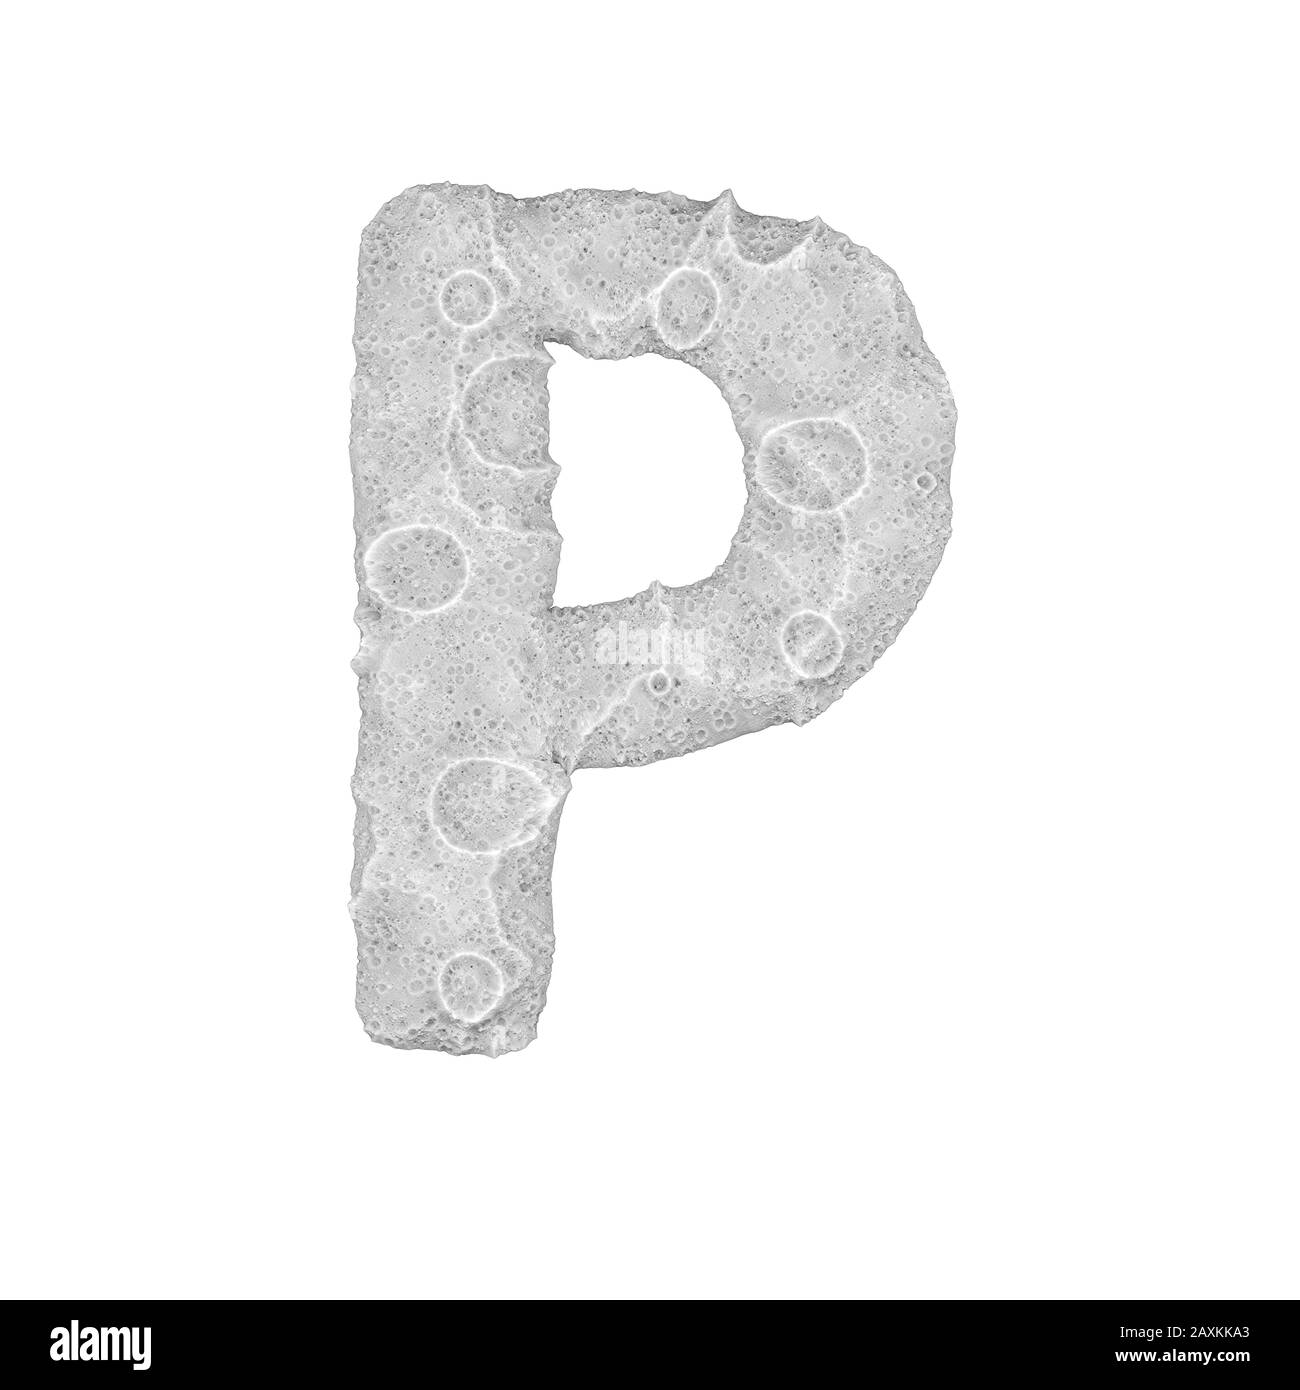 Moon stylized Letter 'P' - on white background - 3D render Stock Photo